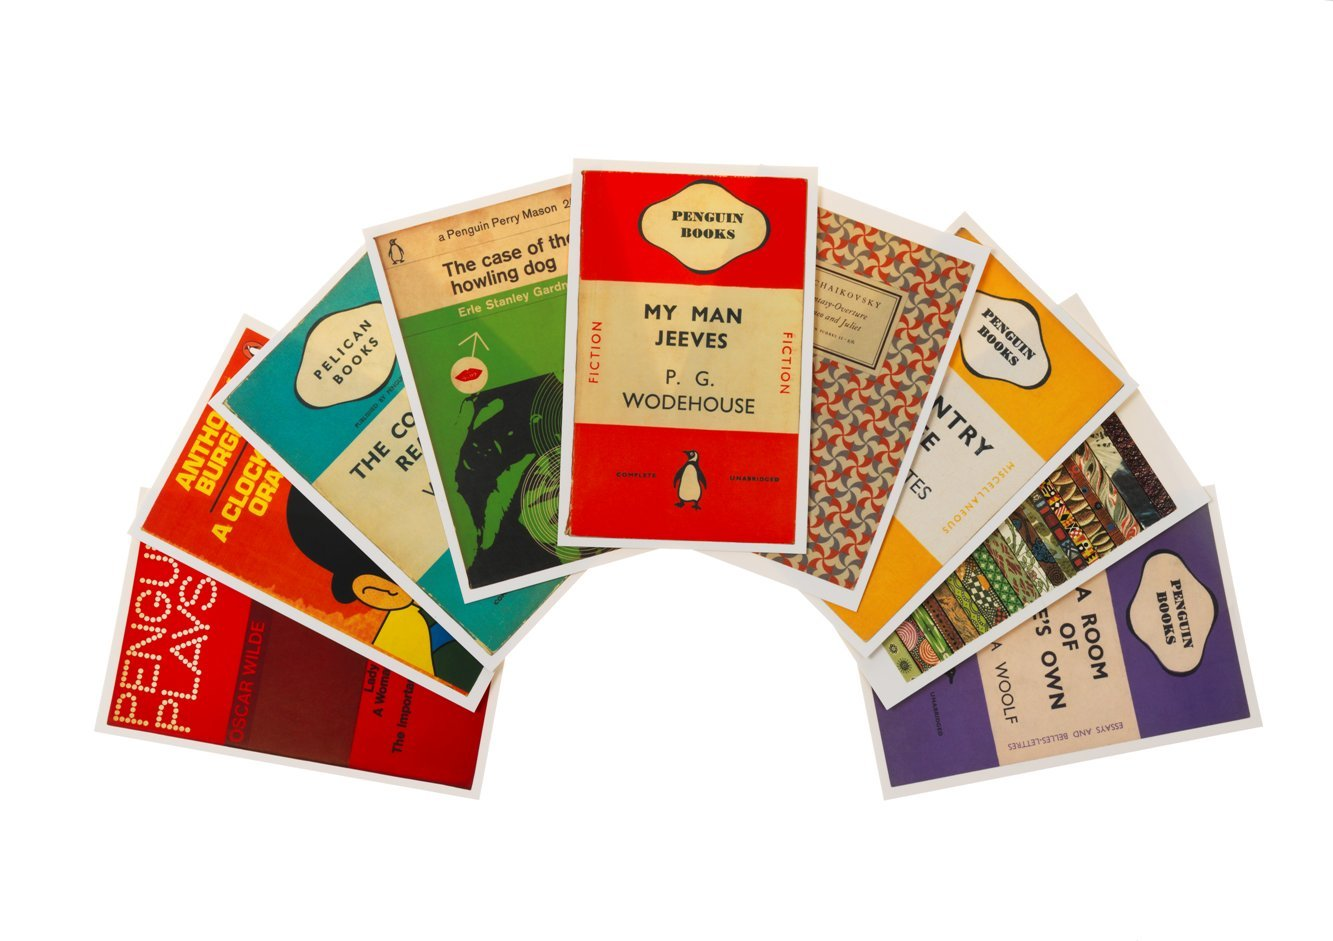 Postcards featuring Penguin Books covers